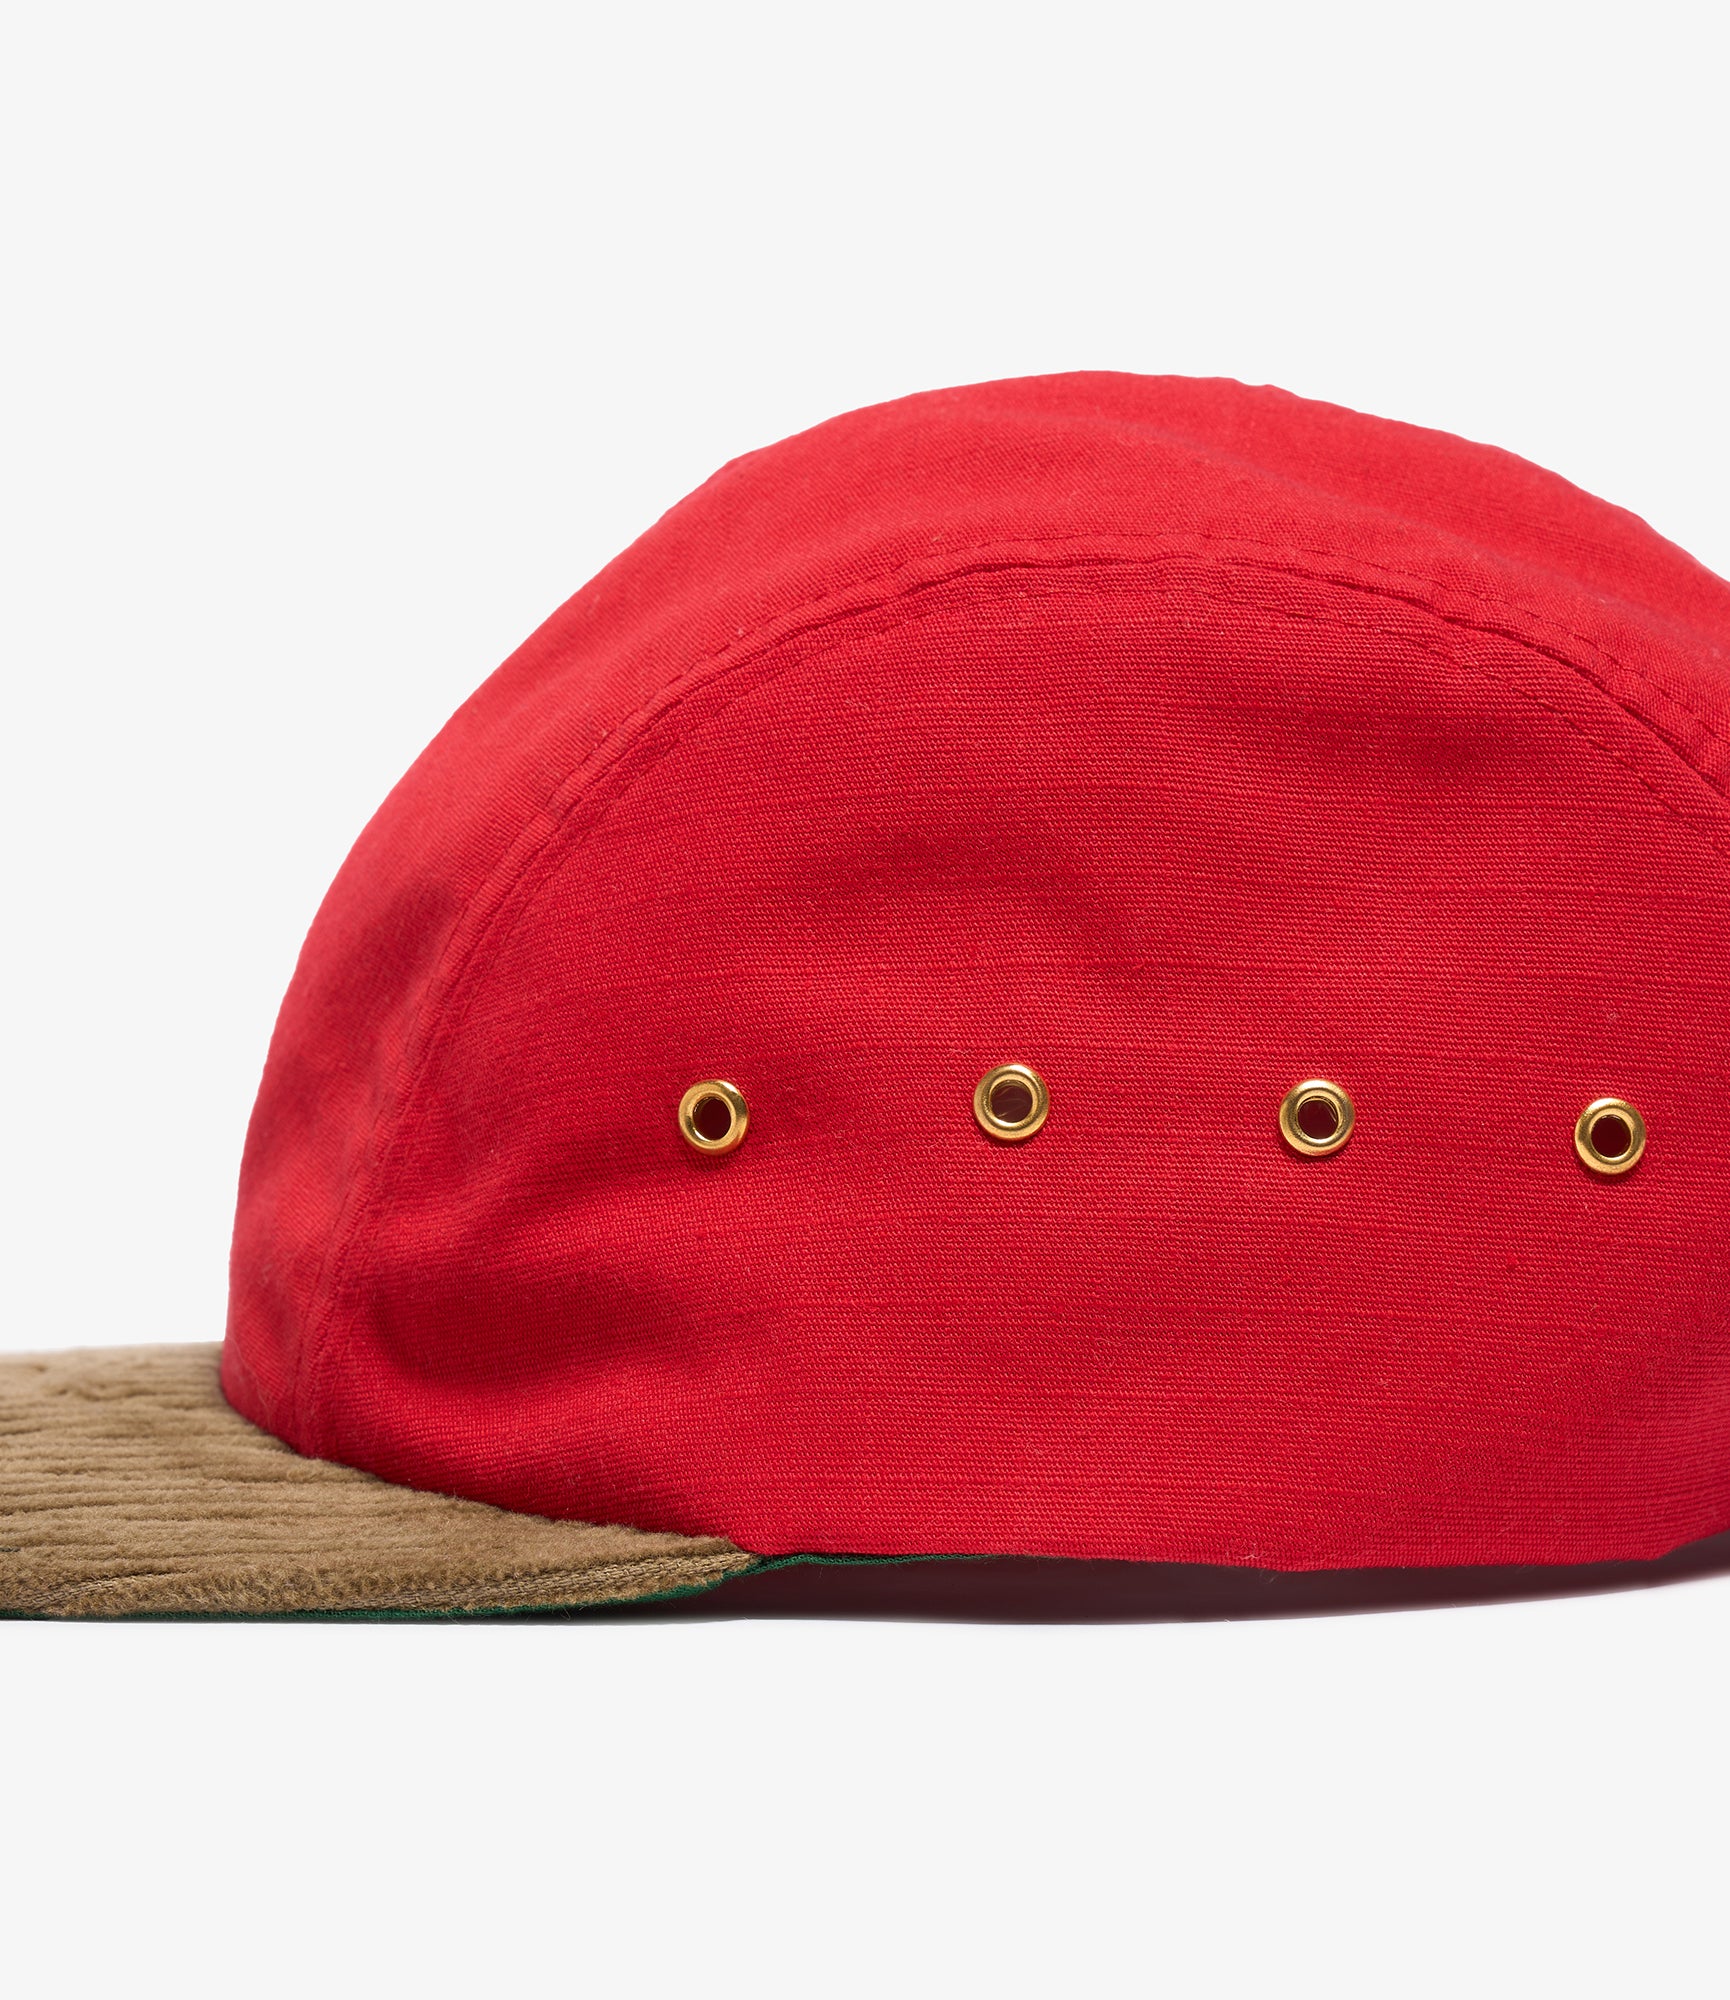 Manager in Training - 4 panel hat - Red / Khaki